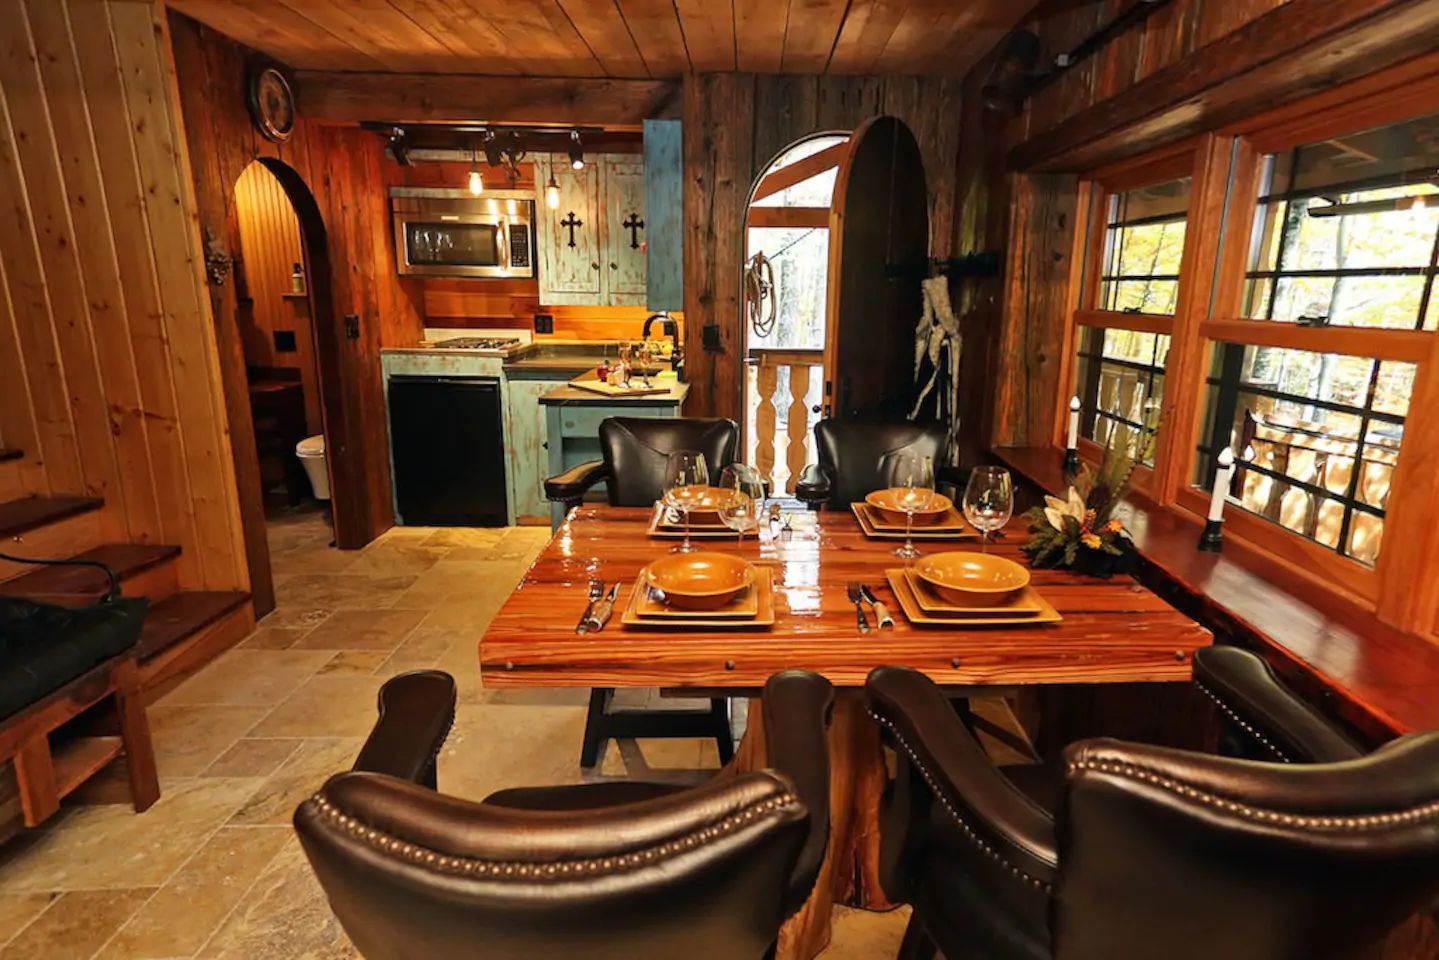 Interior of a kitchen and dining area with dark wood paneling on the walls and ceiling. Leather chairs sit around a wooden table with place settings in the forefront. The background has a door ajar, leading to the outdoors, and a blue kitchen area.